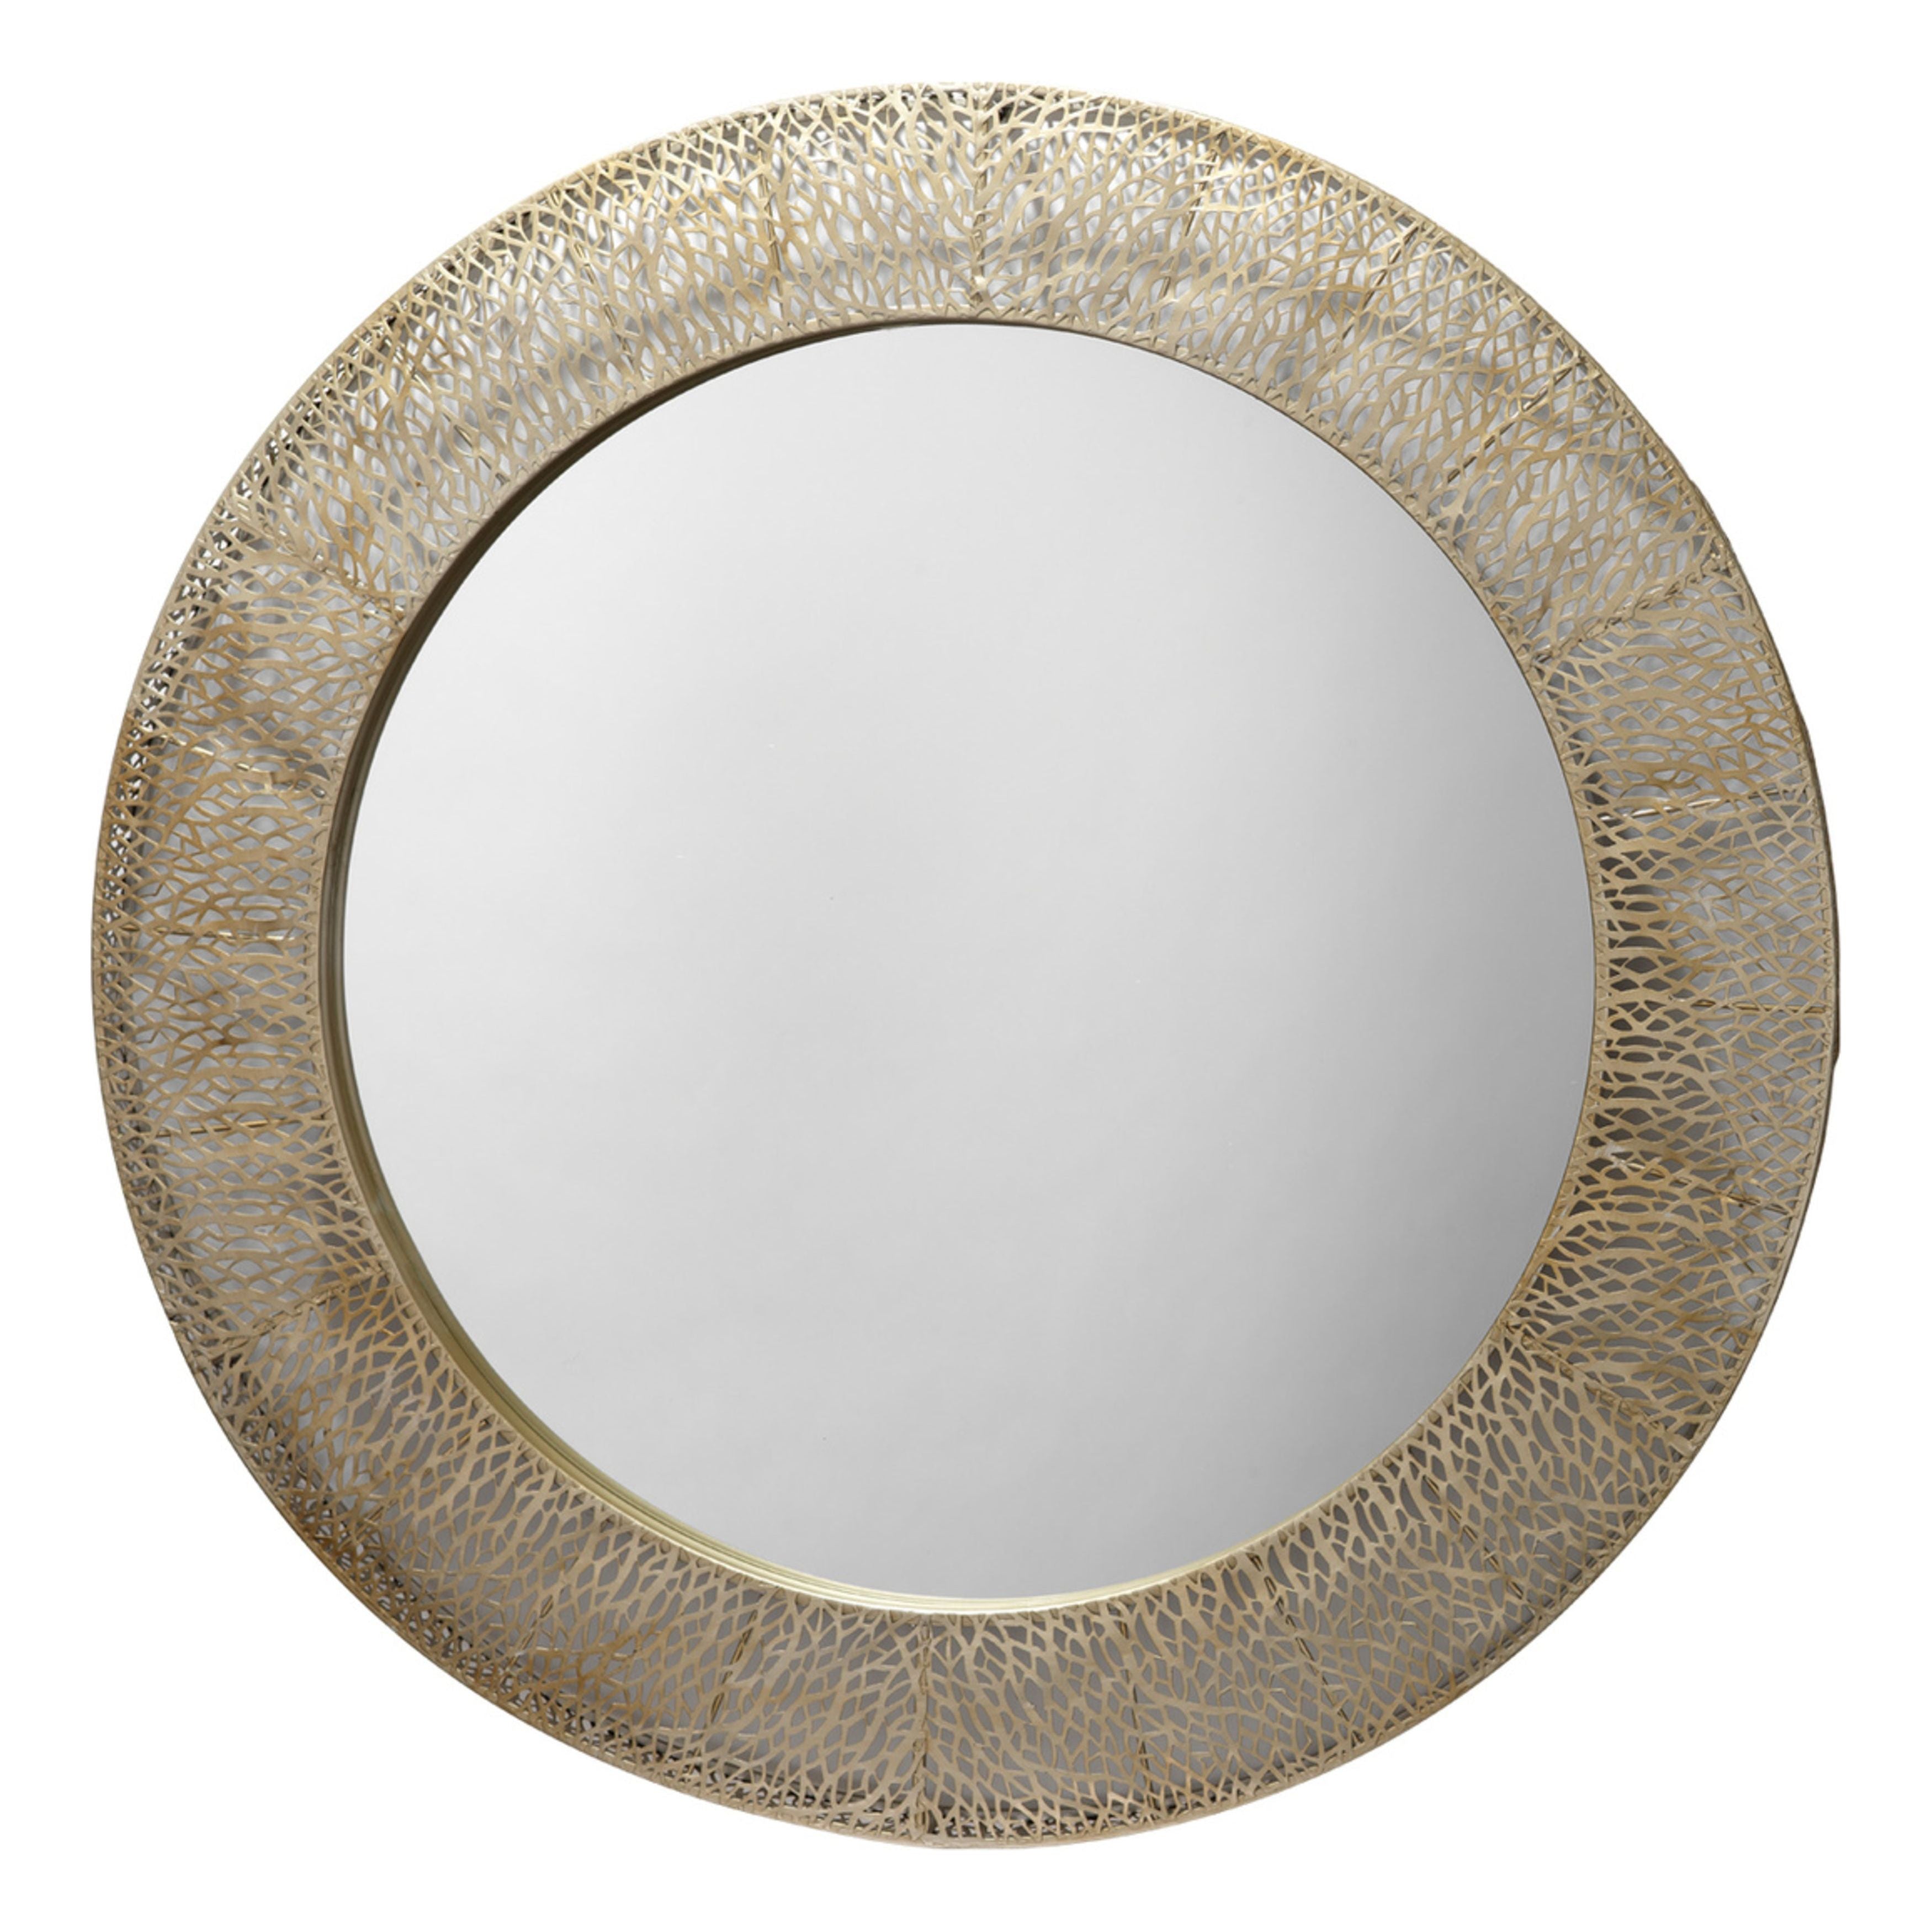 Jamie Young Company - LS418-MIR4 - Sutherlin Mirror -  - Champagne